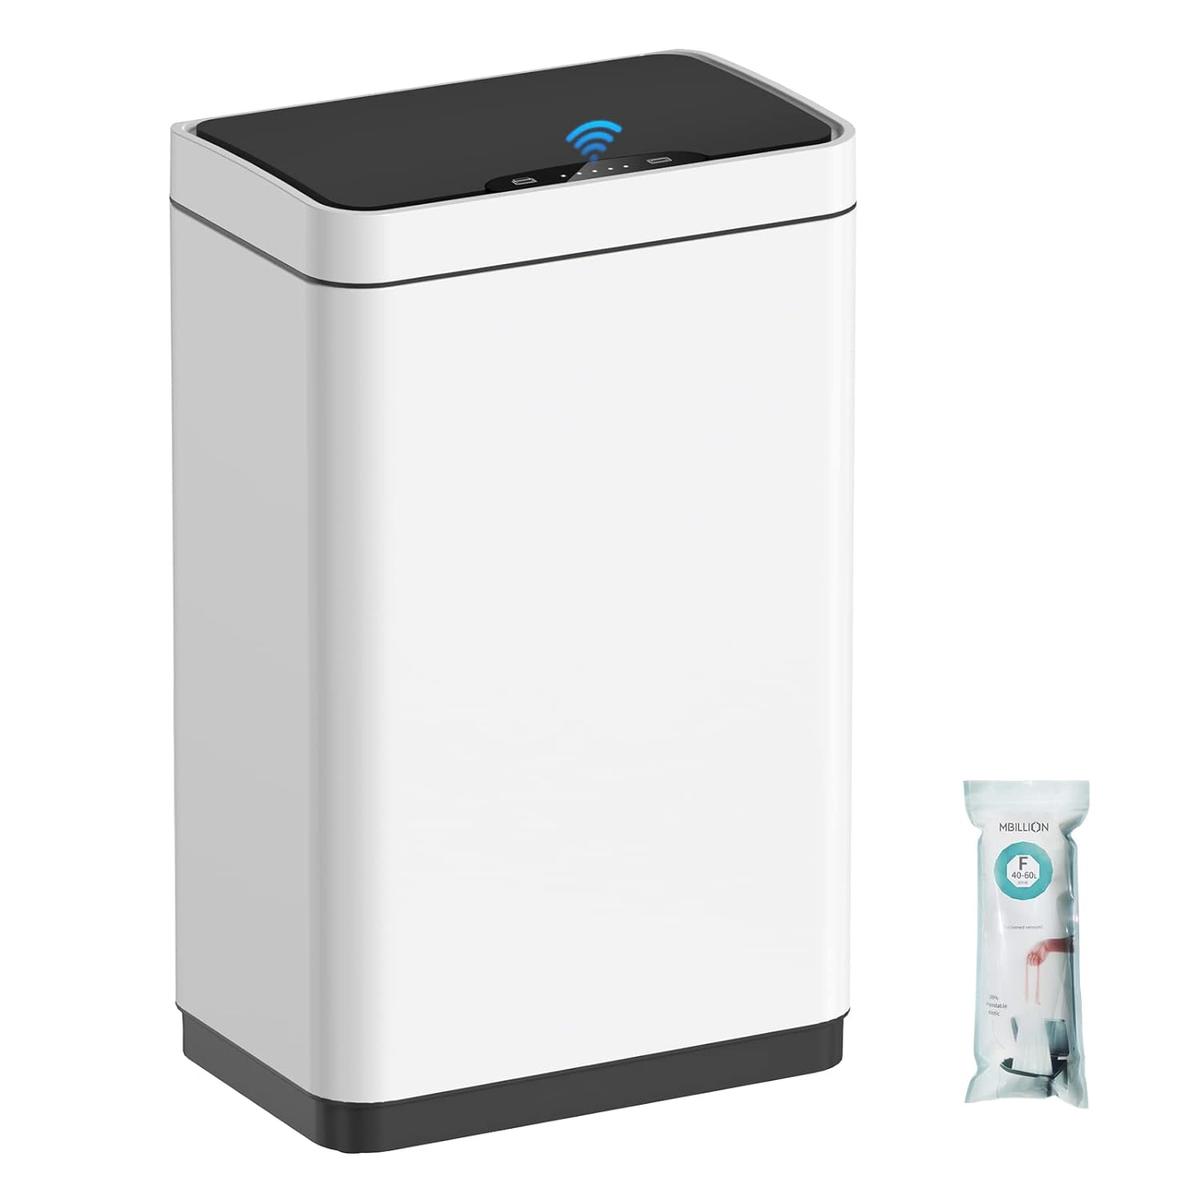 Mbillion Automatic Touchless Trash Can, 15 Gallon, White, Retail $120.00